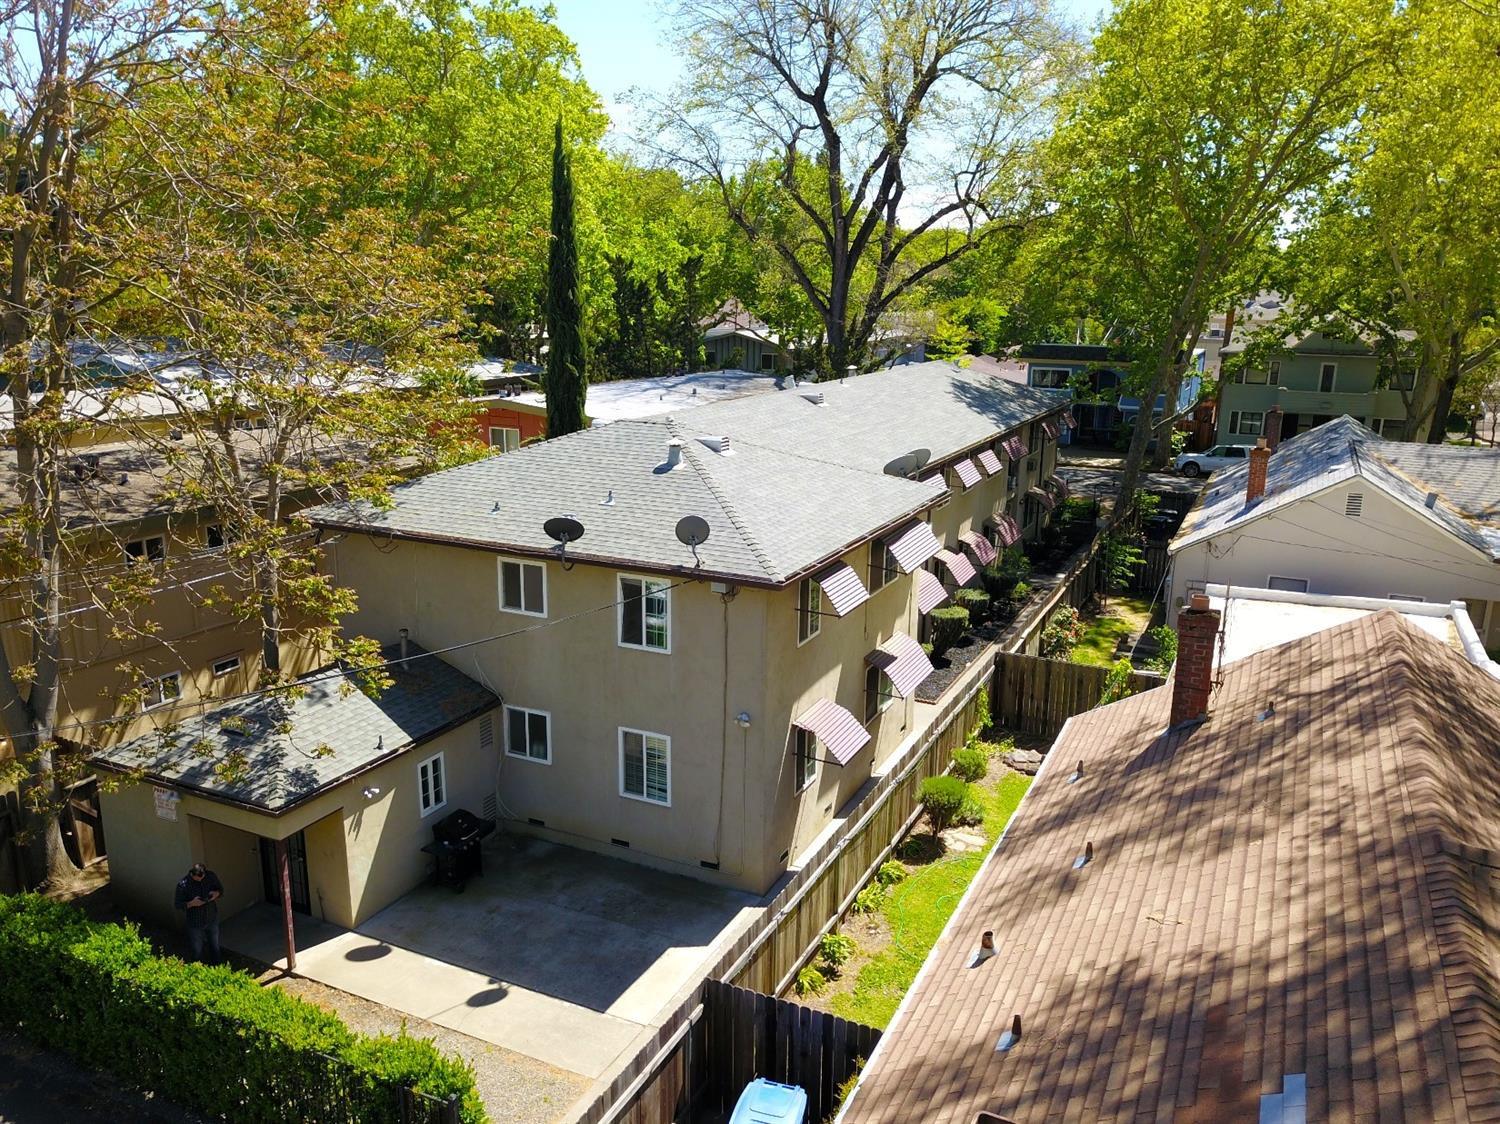 an aerial view of a house with swimming pool and large trees